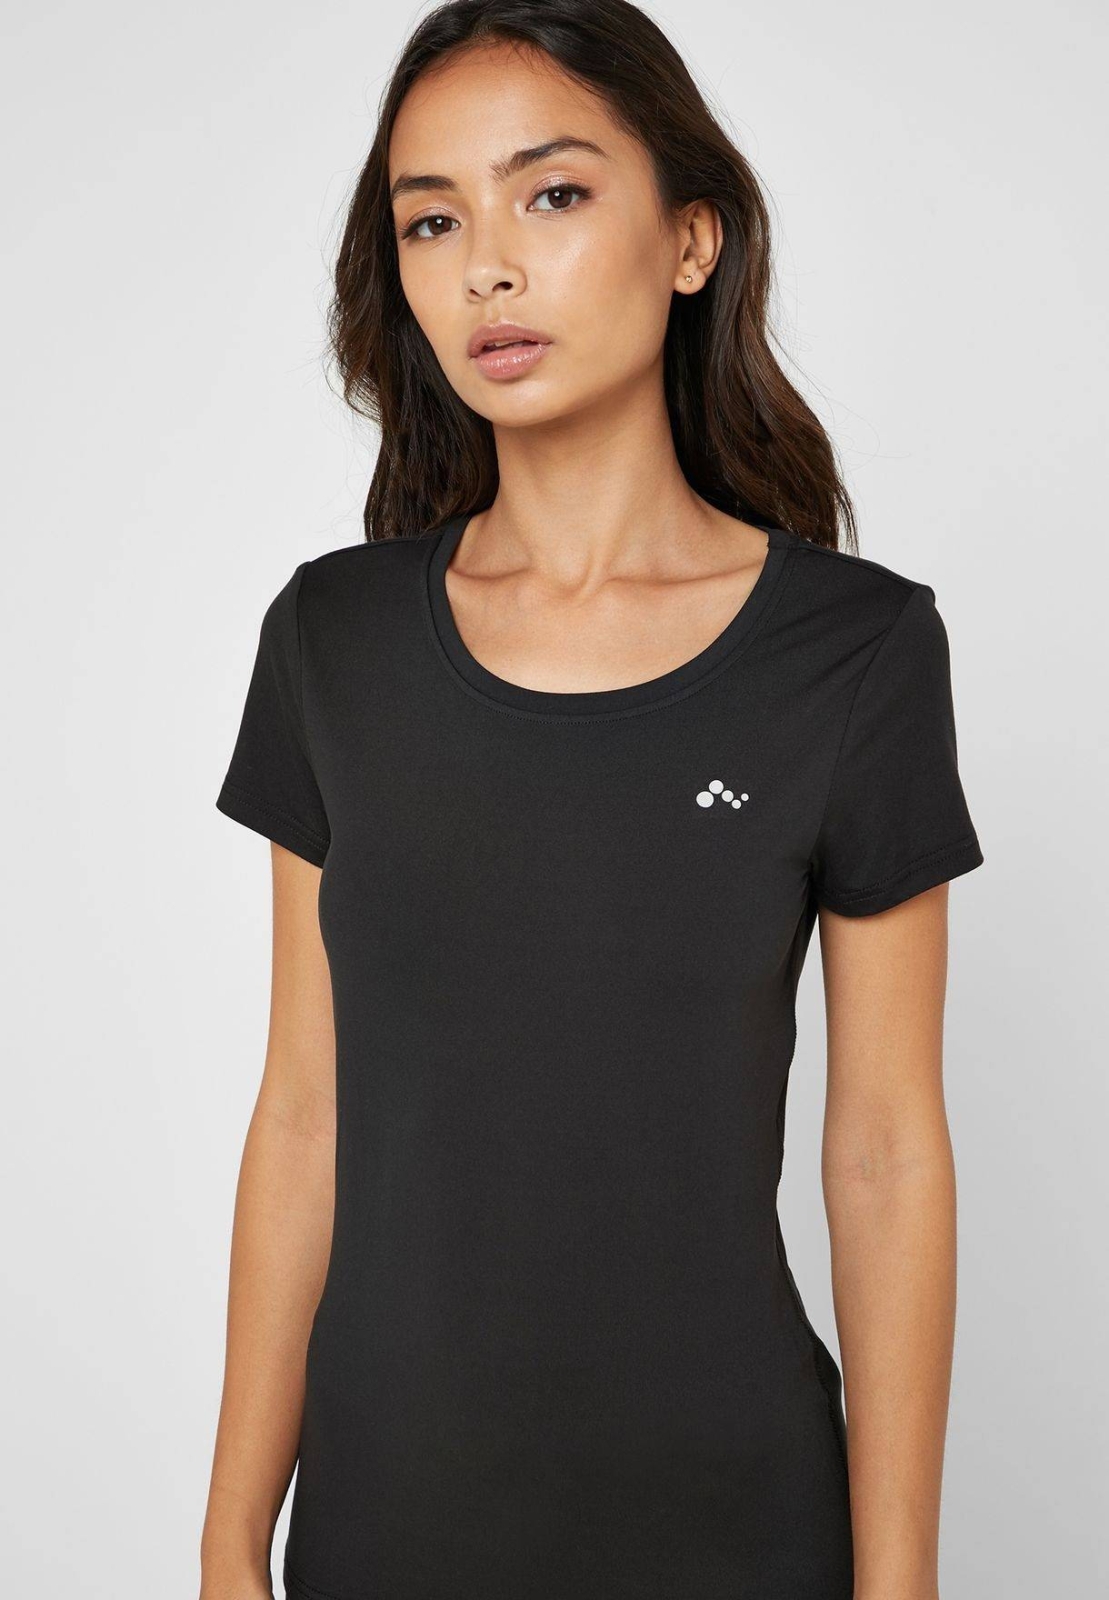 ONLY PLAY CLARISSA TRAINING TEE